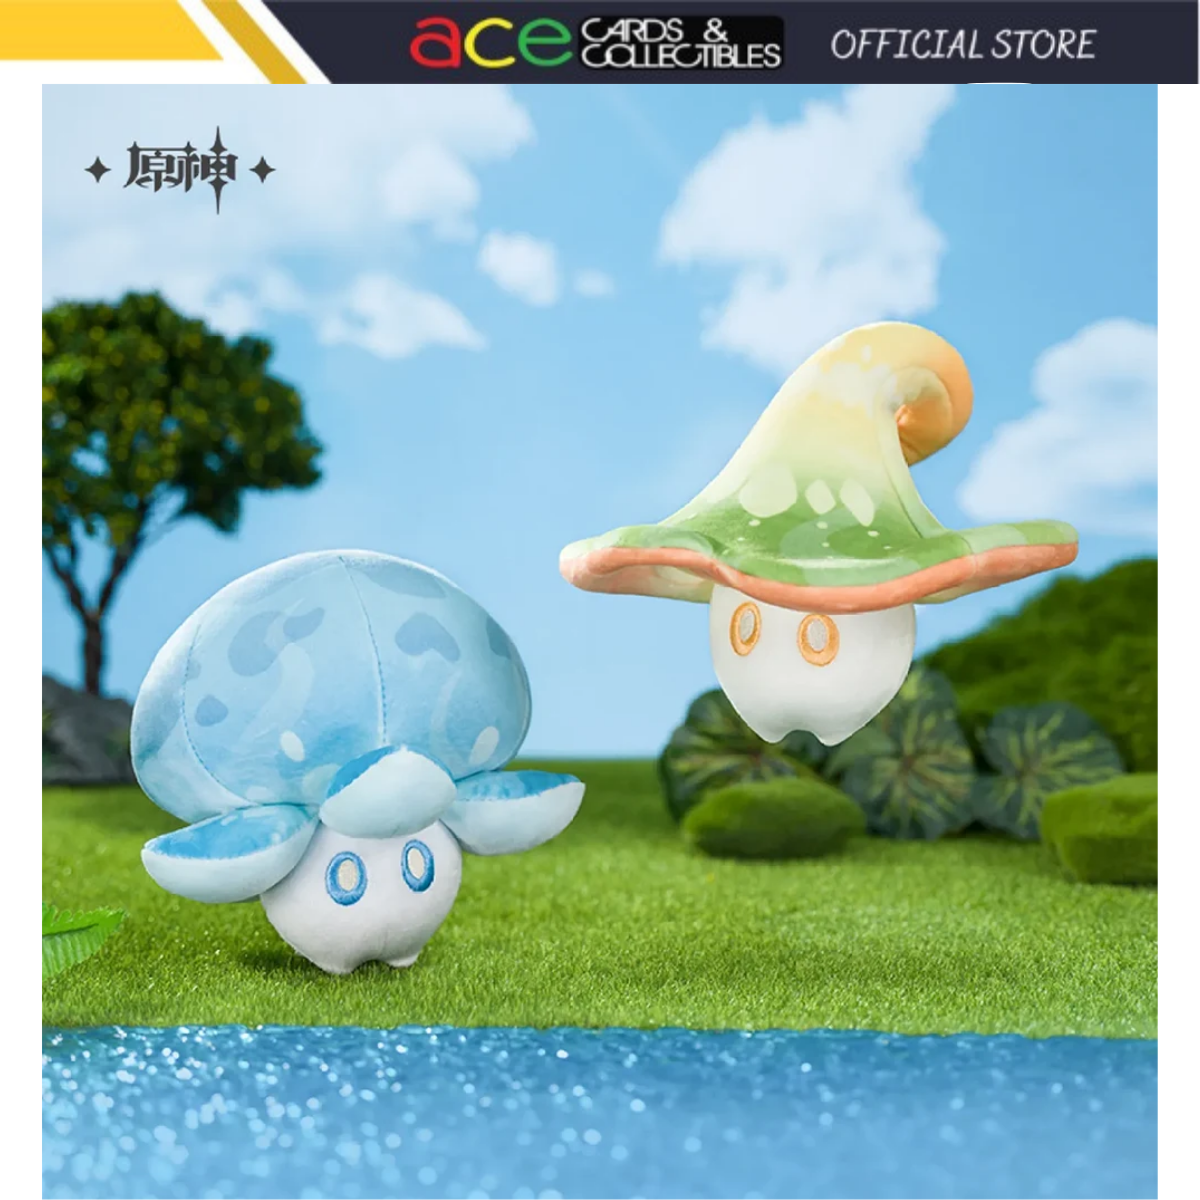 miHoYo Genshin Impact Floating Hydro / Dendro Fungus Plushie-Hydro Fungus-miHoYo-Ace Cards & Collectibles